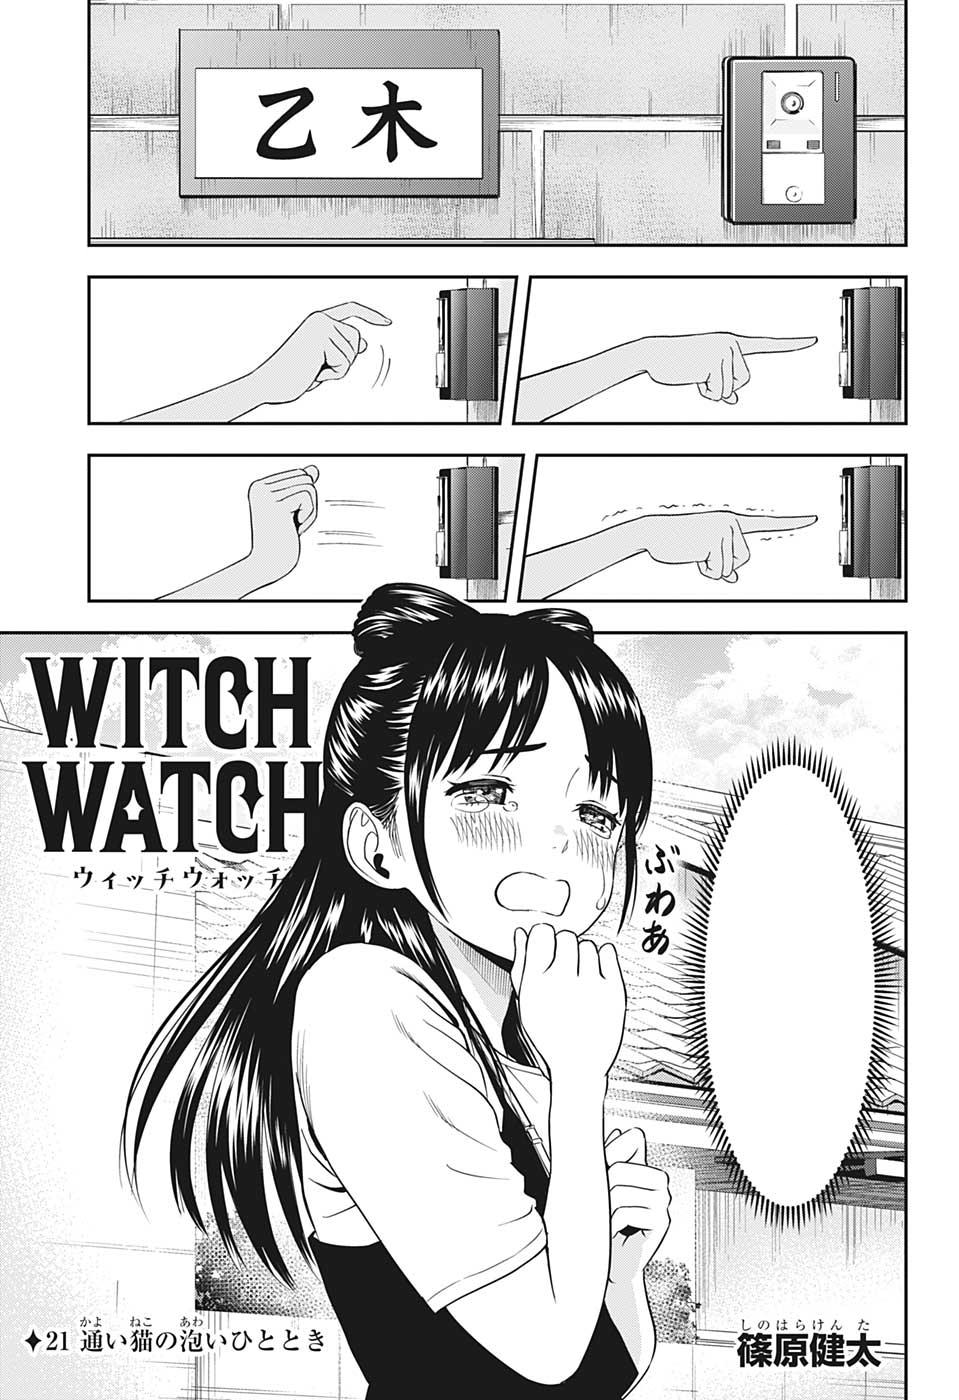 Witch Watch, Chapter 67 - Witch Watch Manga Online